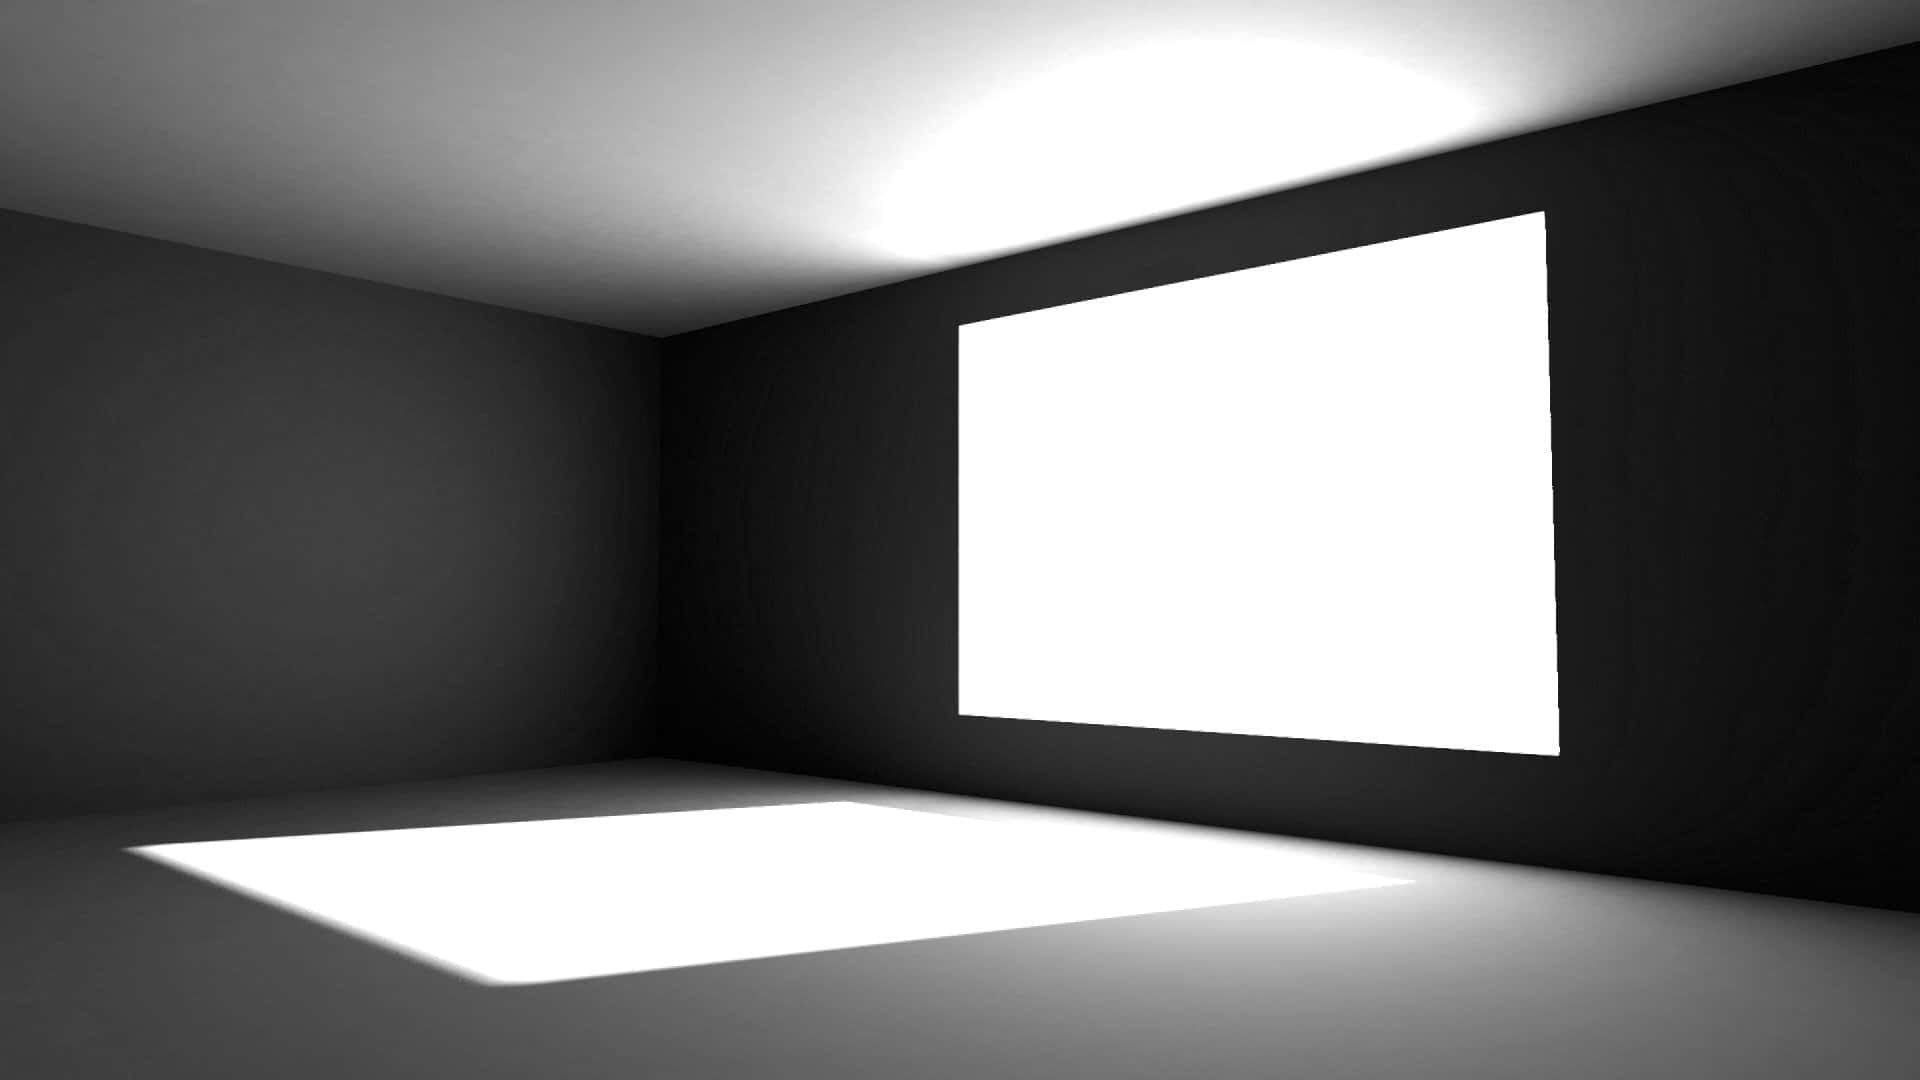 Monochrome Empty Room With Square Window Background